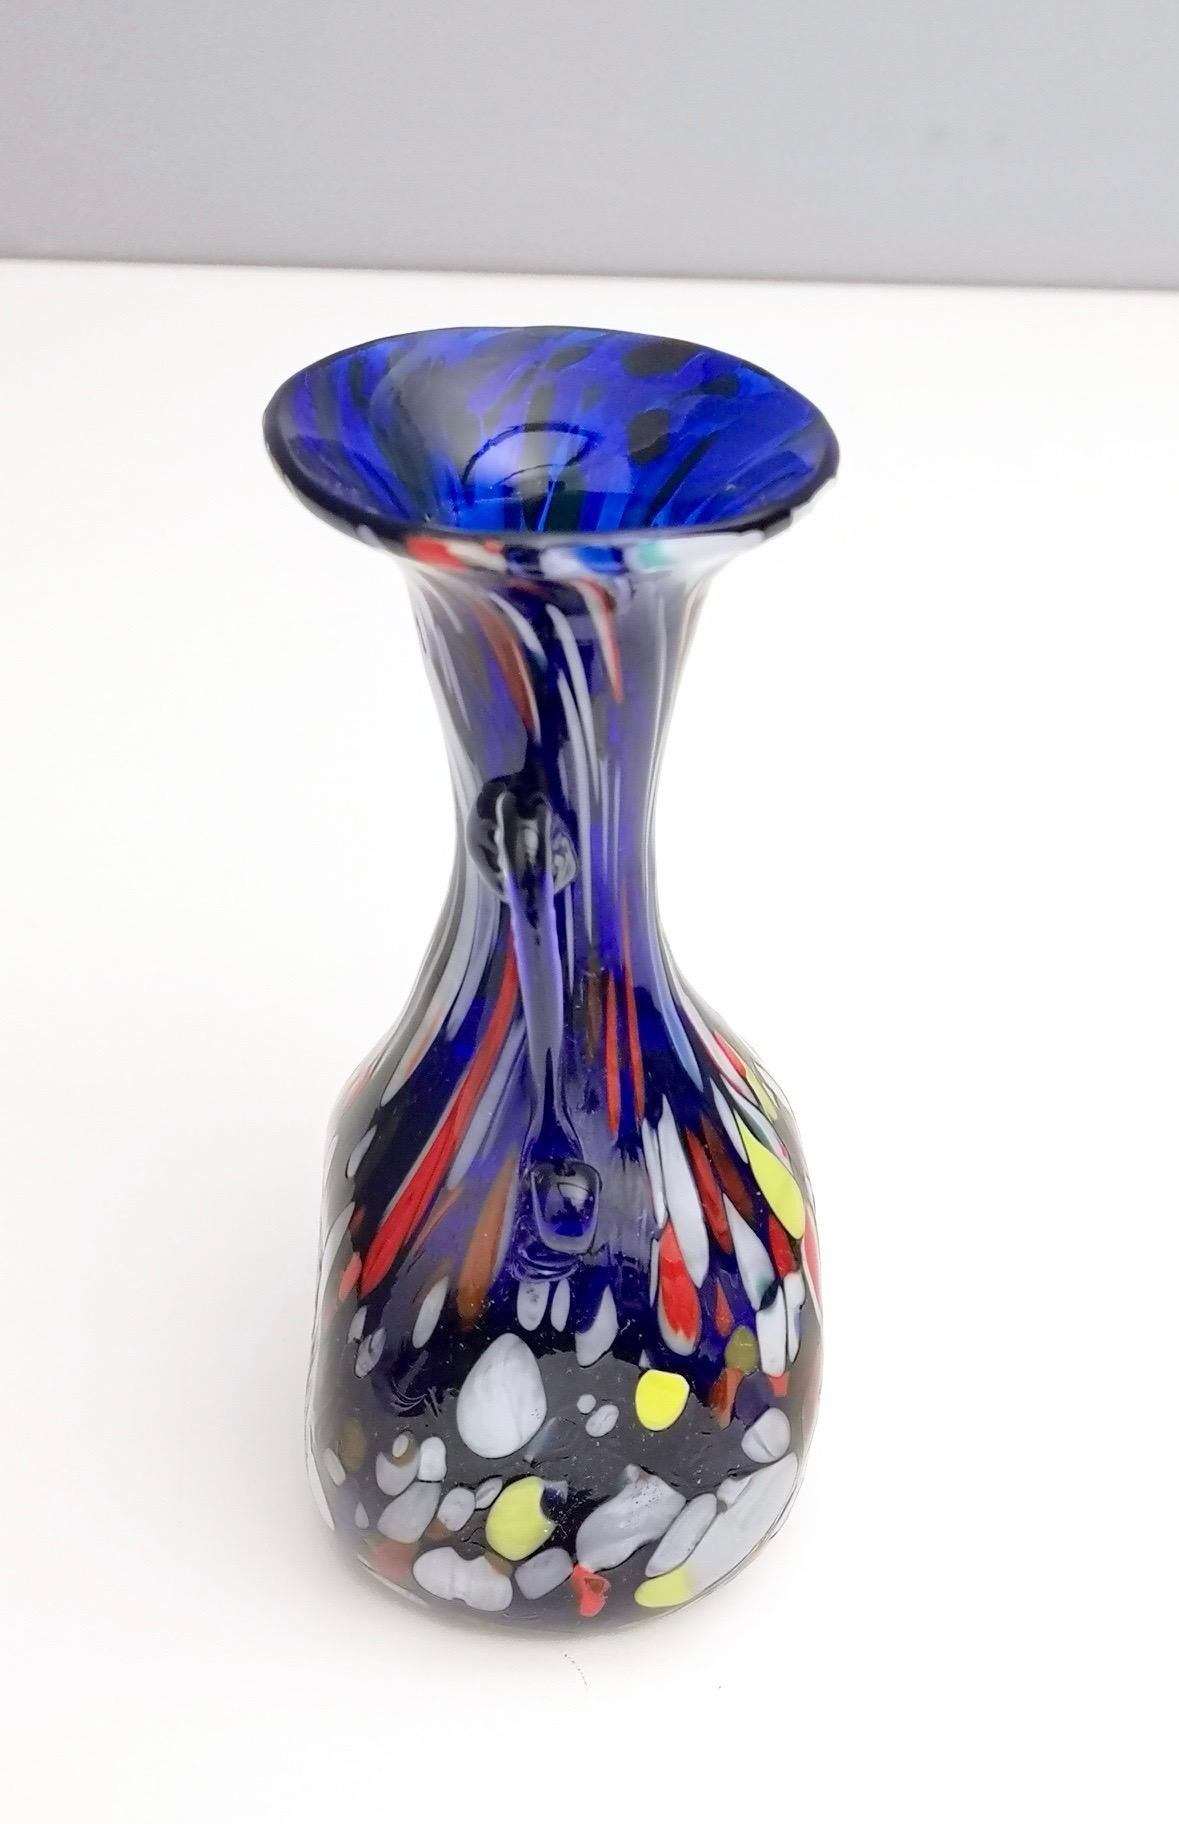 Vintage Art Nouveau Blue Murano Glass Vase Produced by Toso, Italy In Excellent Condition For Sale In Bresso, Lombardy